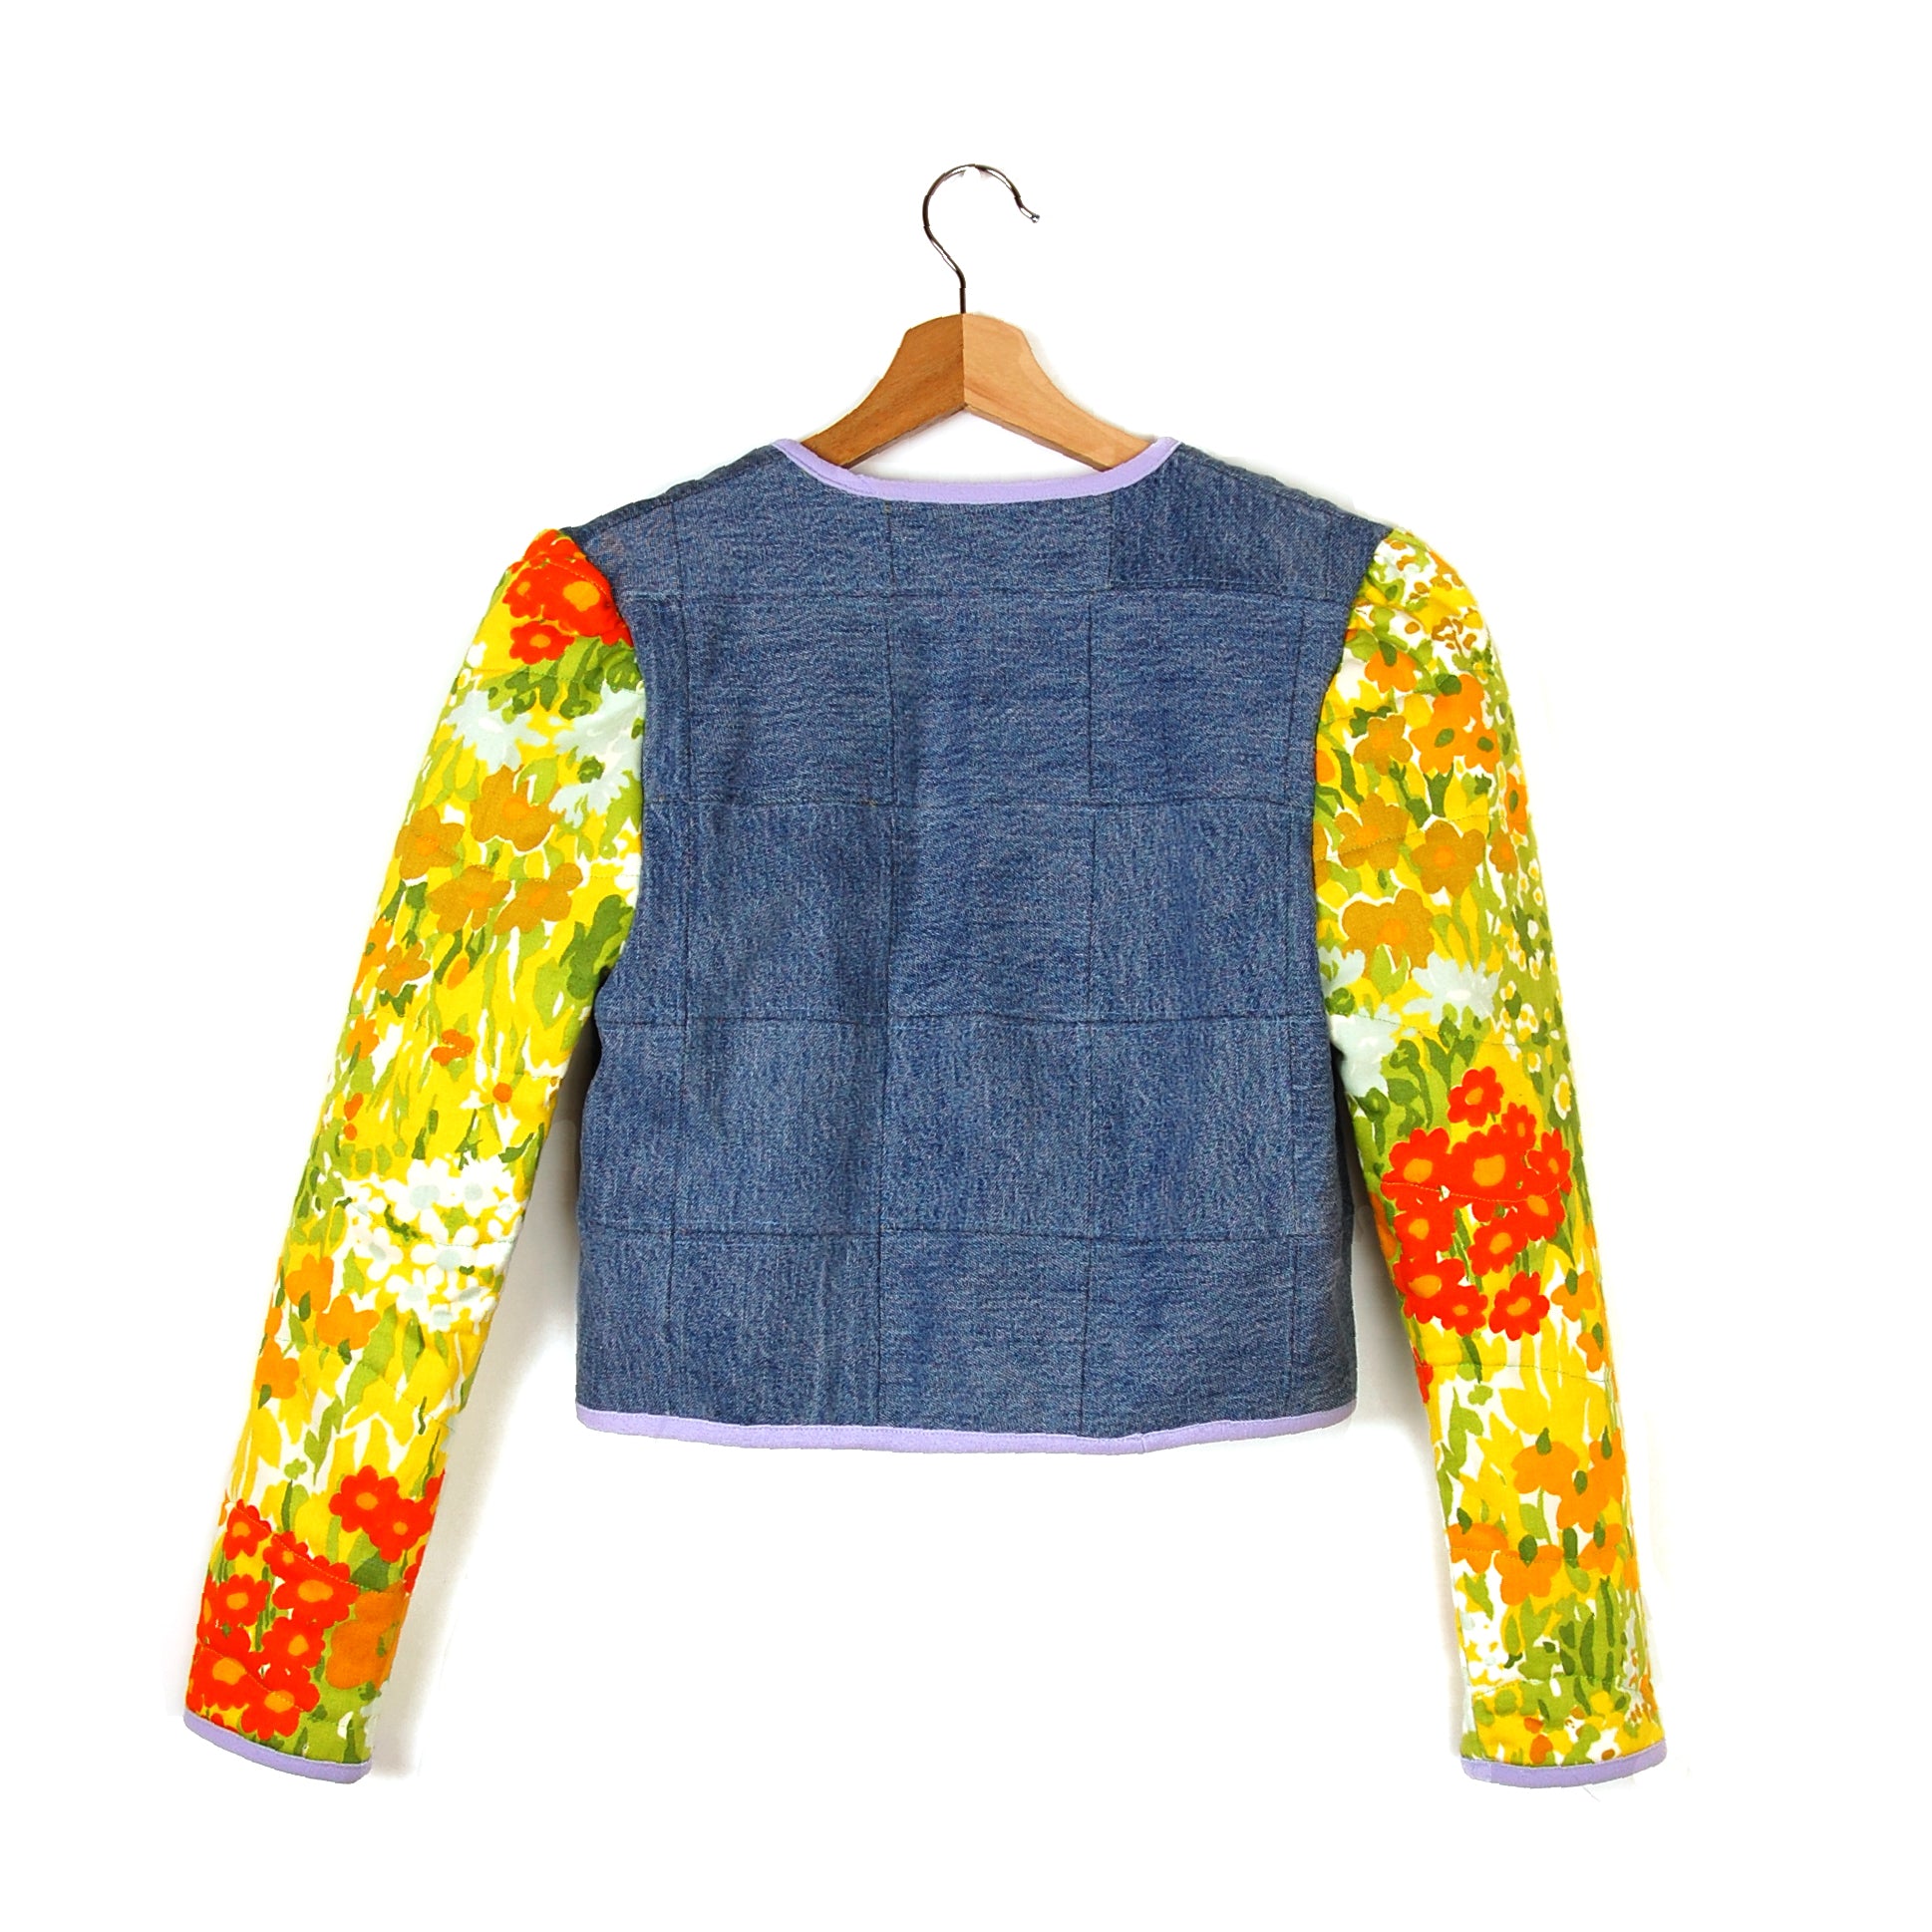 FLOWERS IN THE ATTIC QUILTED JACKET - Late to the Party